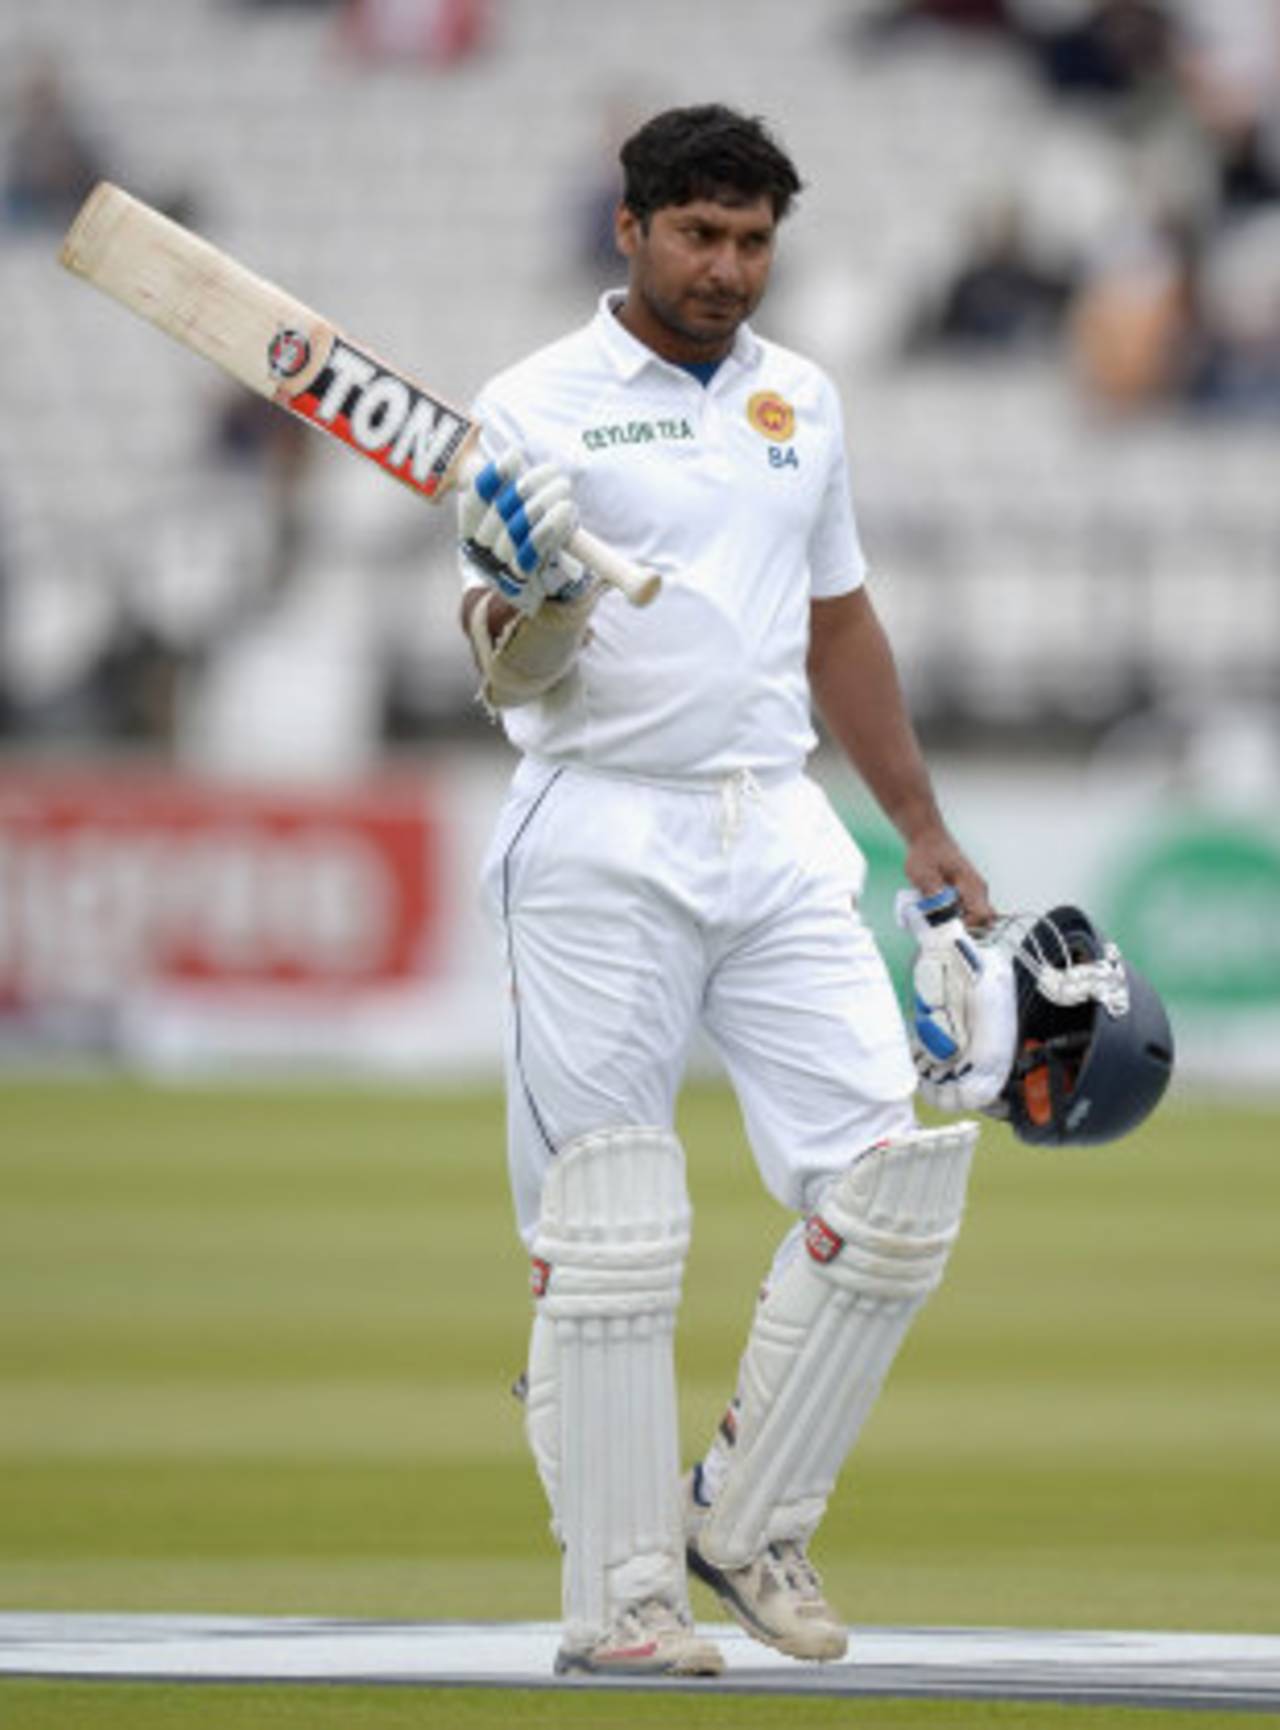 Kumar Sangakkara passed 50 for the second time in the match, England v Sri Lanka, 1st Investec Test, Lord's, 5th day, June 16, 2014